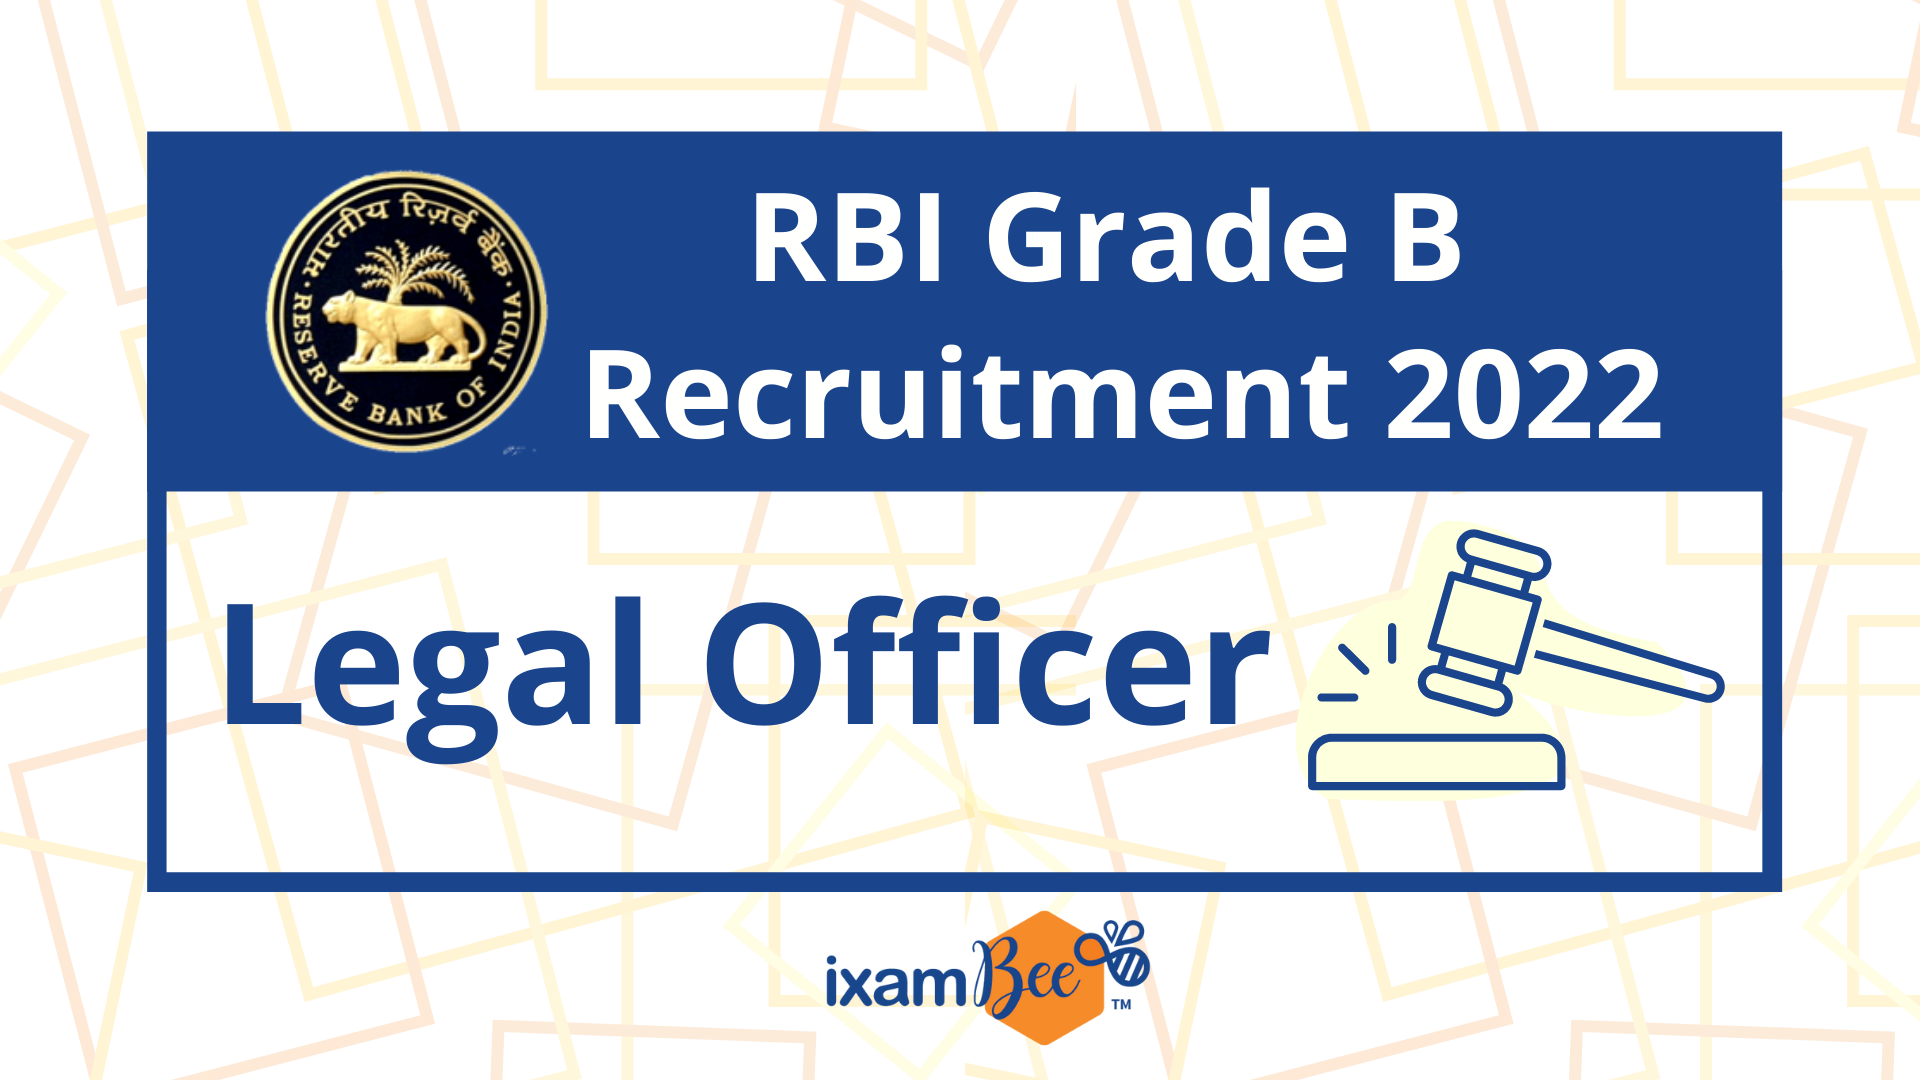 Government Jobs for Lawyers: RBI Grade B Legal Officer Recruitment 2021-22